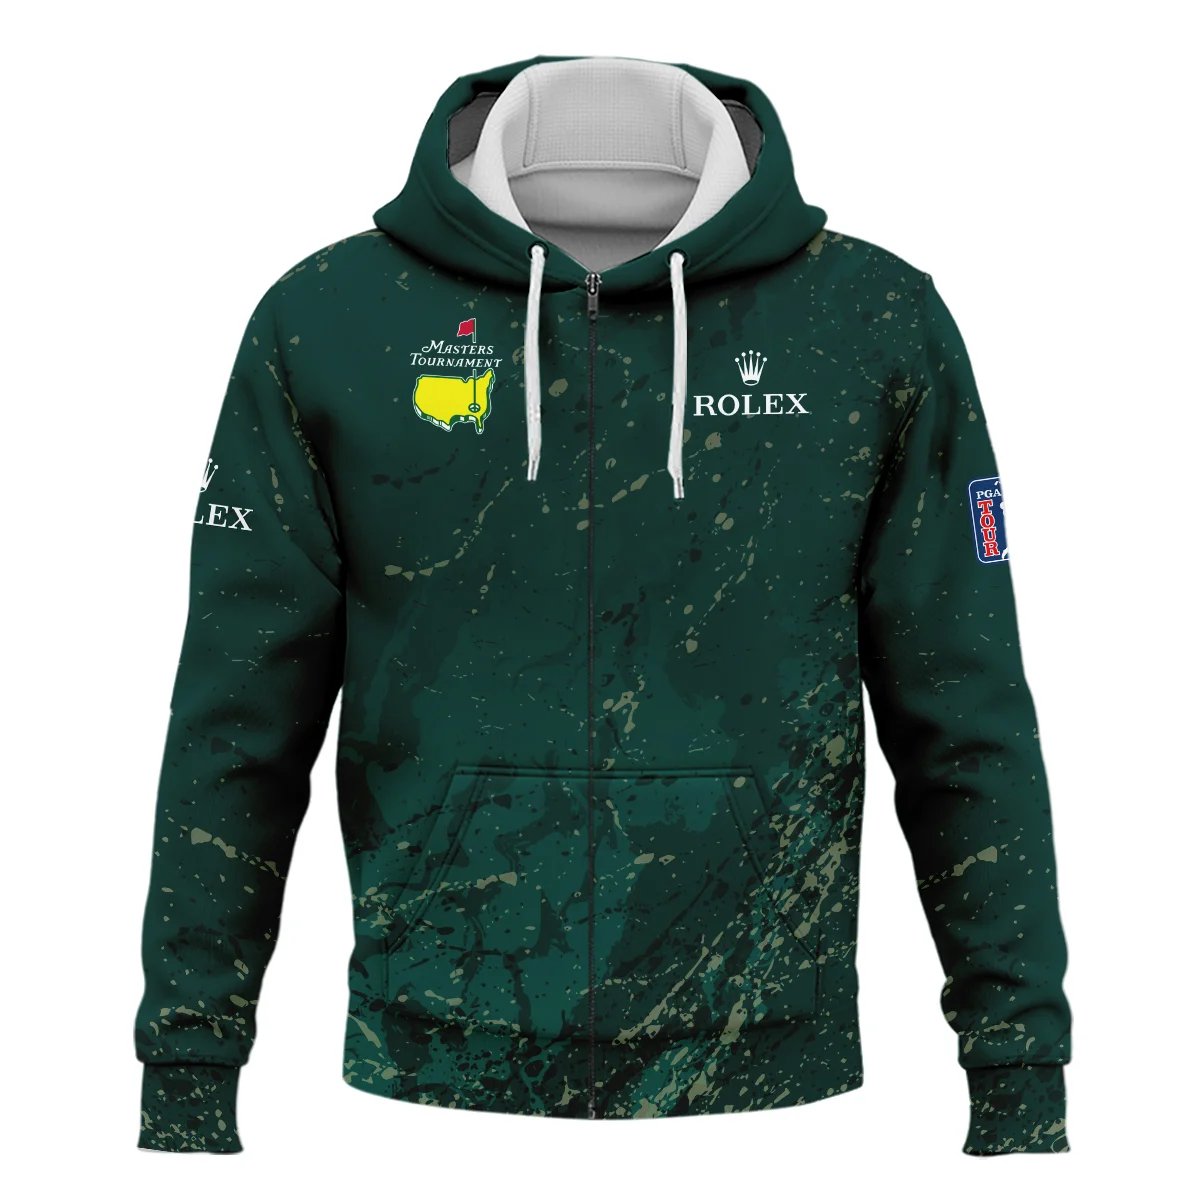 Old Cracked Texture With Gold Splash Paint Masters Tournament Rolex Zipper Hoodie Shirt Style Classic Zipper Hoodie Shirt